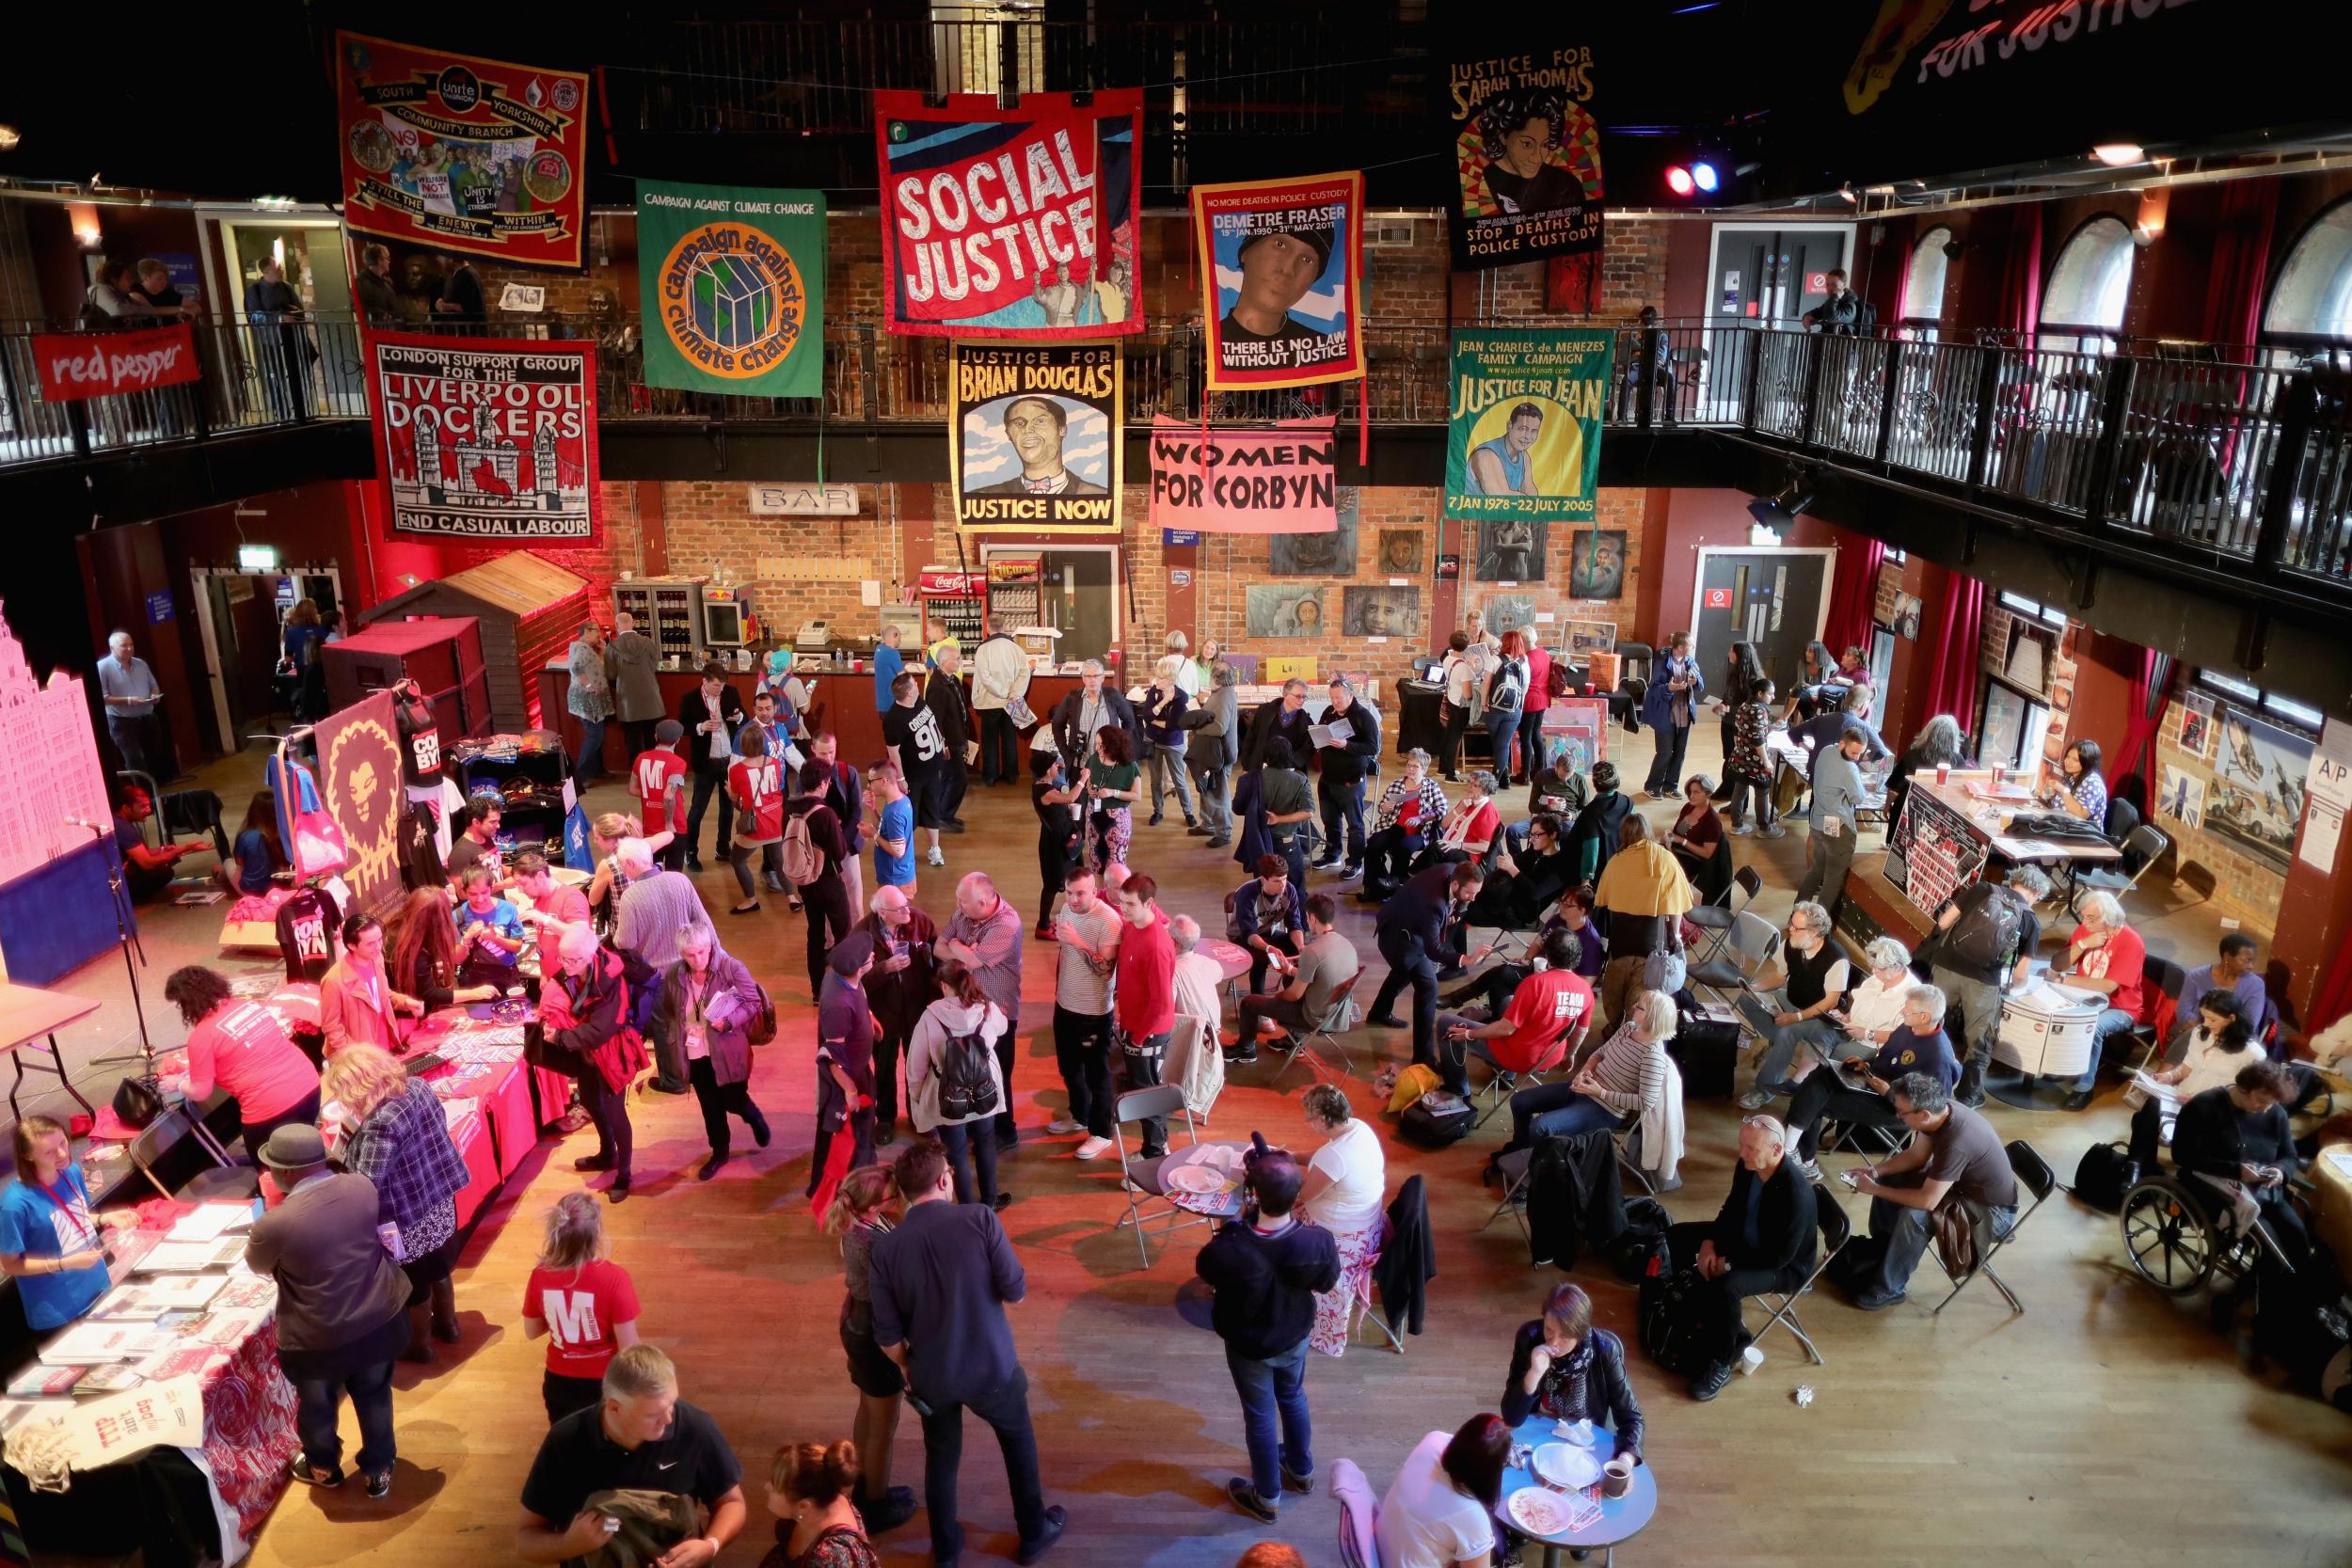 Momentum supporters gather at Liverpool's Black-E building for their fringe festival of politics in Liverpool, 2016